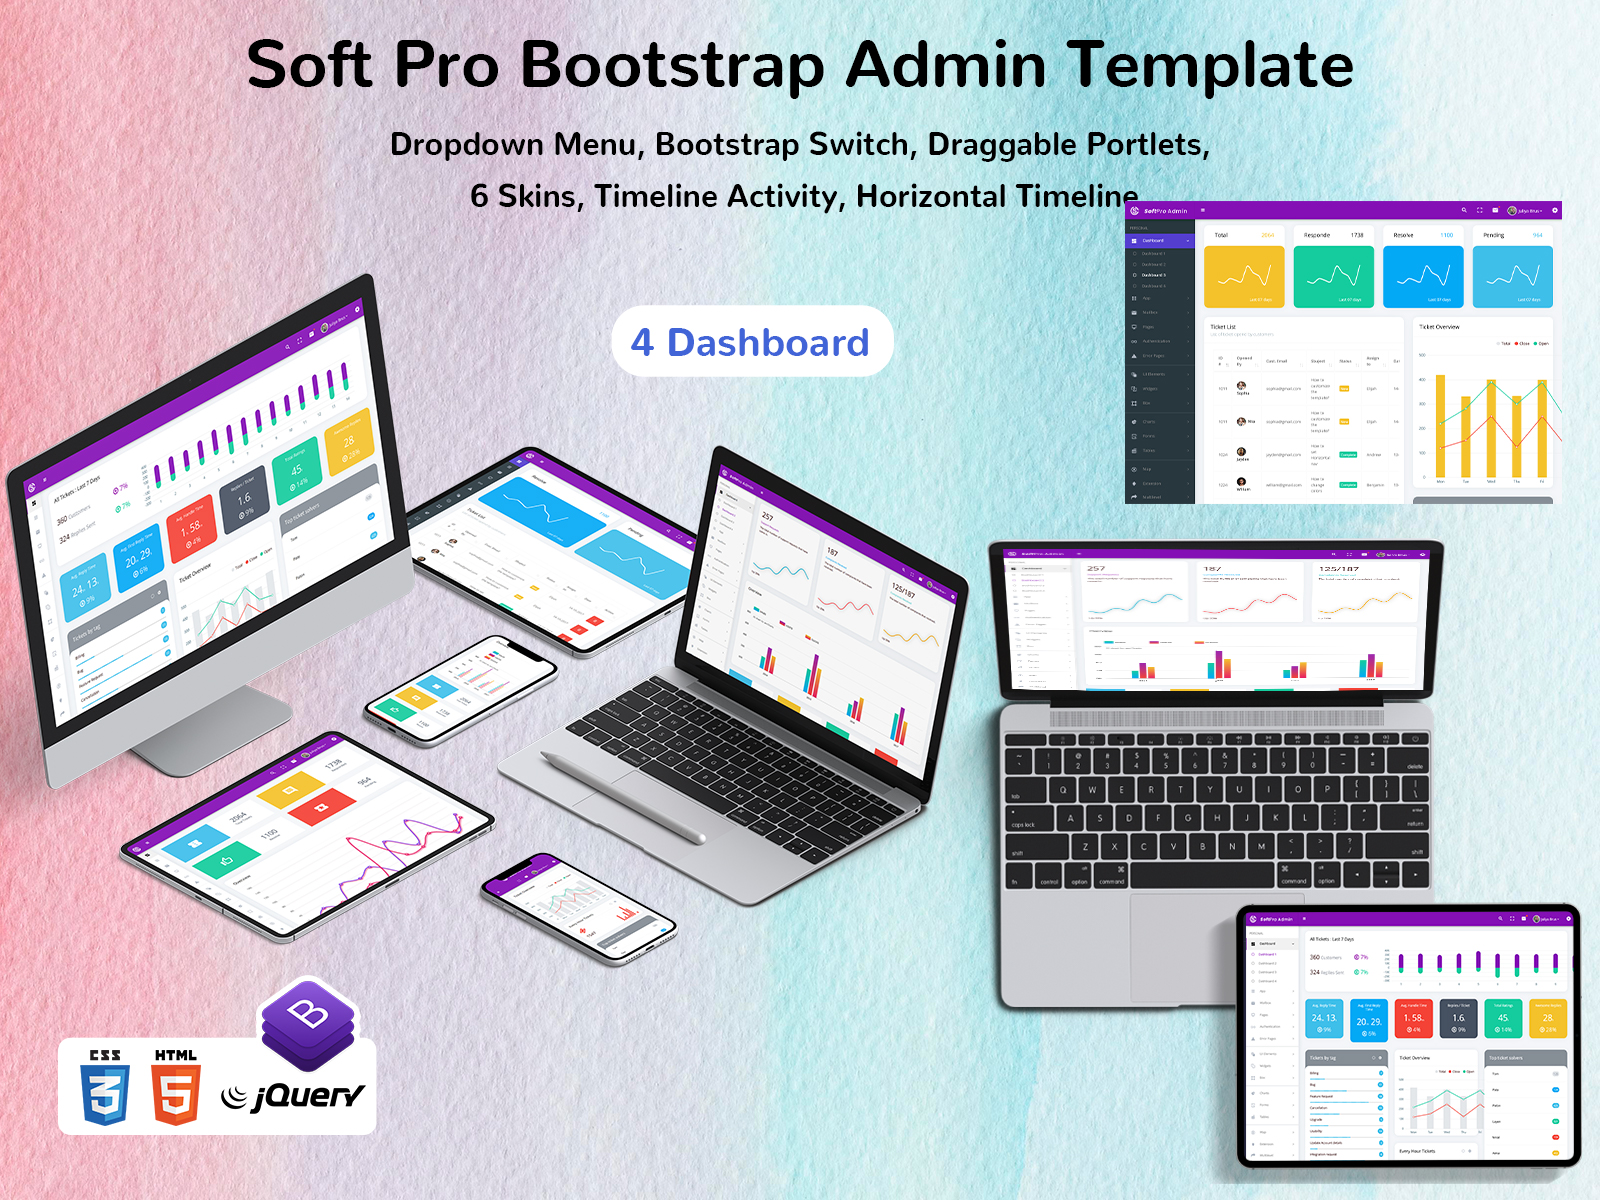 Bootstrap Admin Web App With Admin Panel – Soft Pro